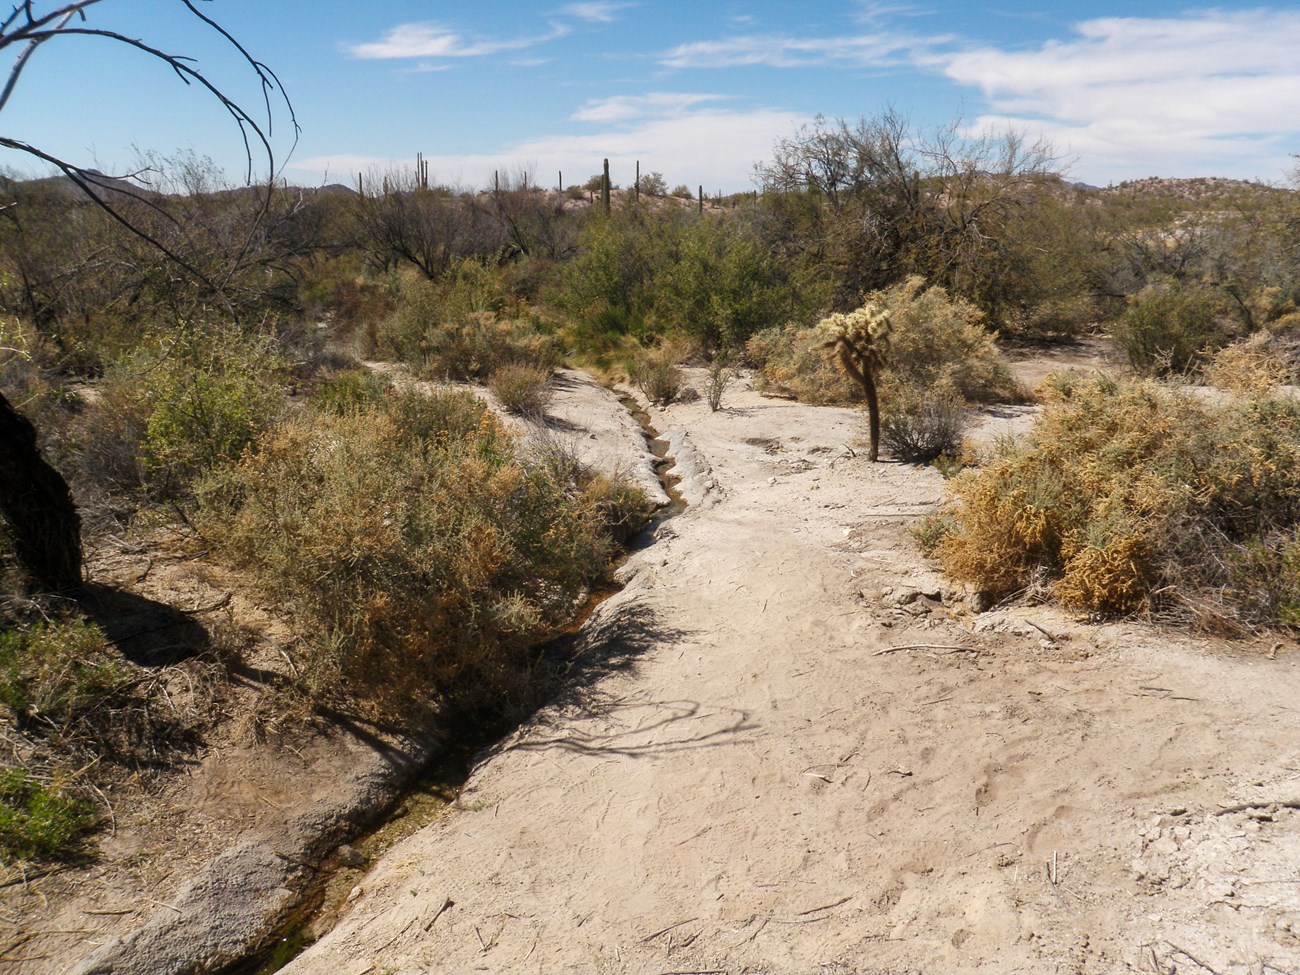 A narrow concrete channel is surrounded by desert foliage.